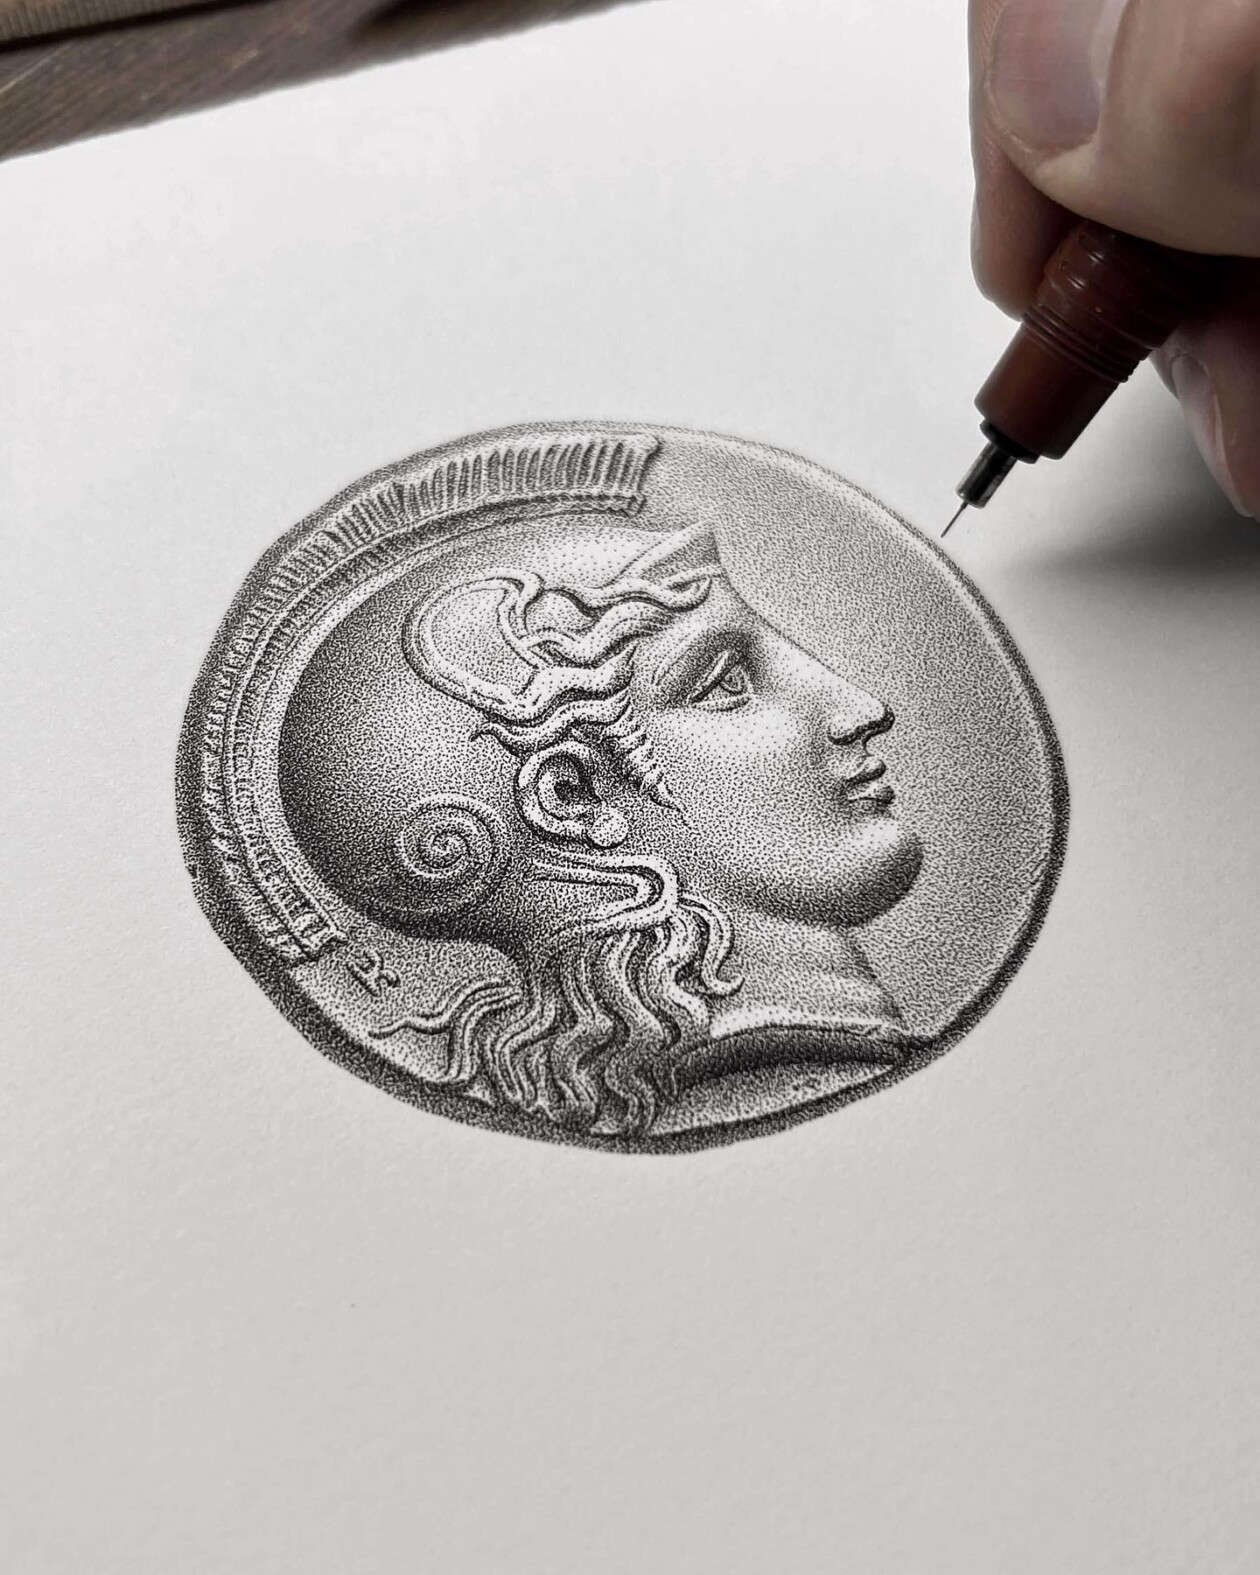 Detailed Stipple Illustrations Made Of Tens Of Millions Of Ink Dots By Xavier Casalta (11)